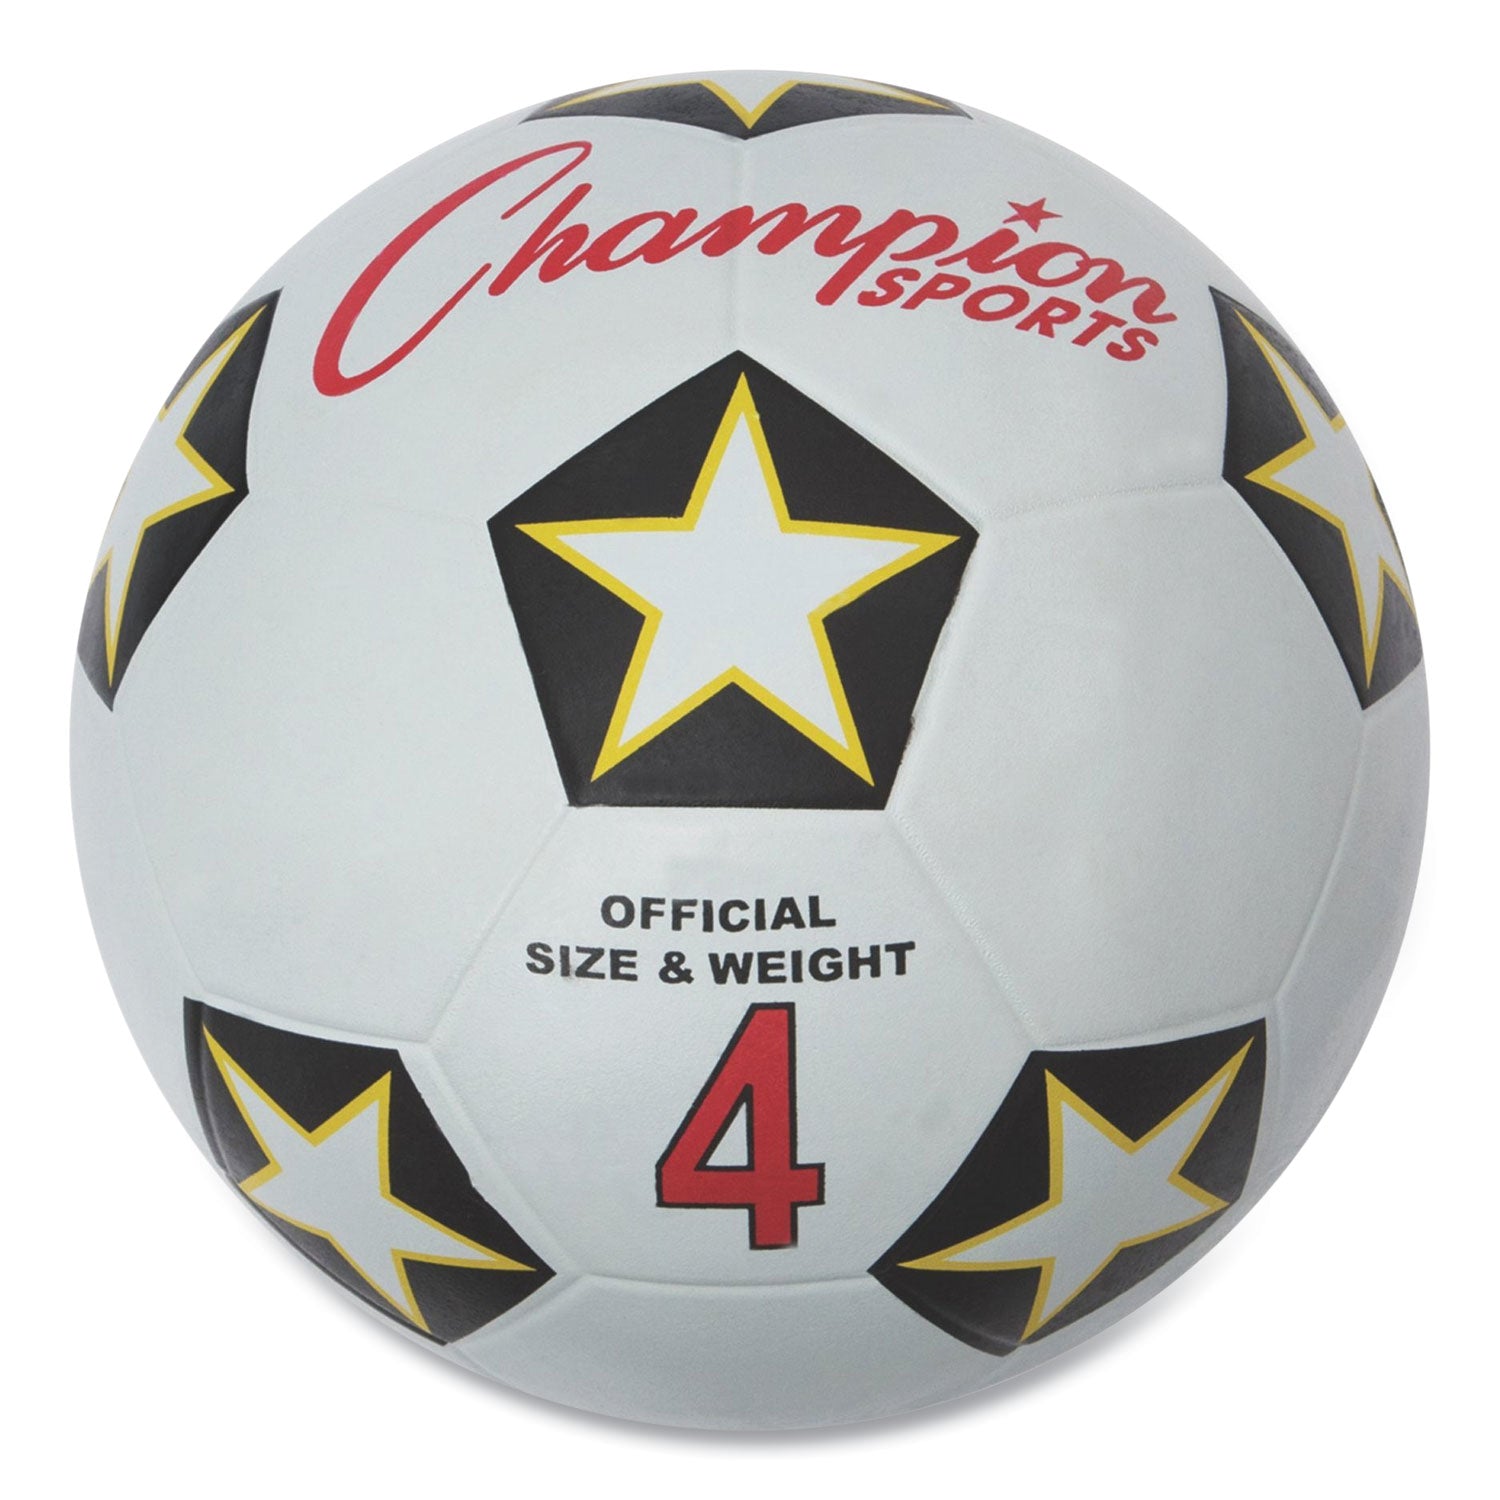 Rubber Sports Ball, For Soccer, No. 4 Size, White/Black - 